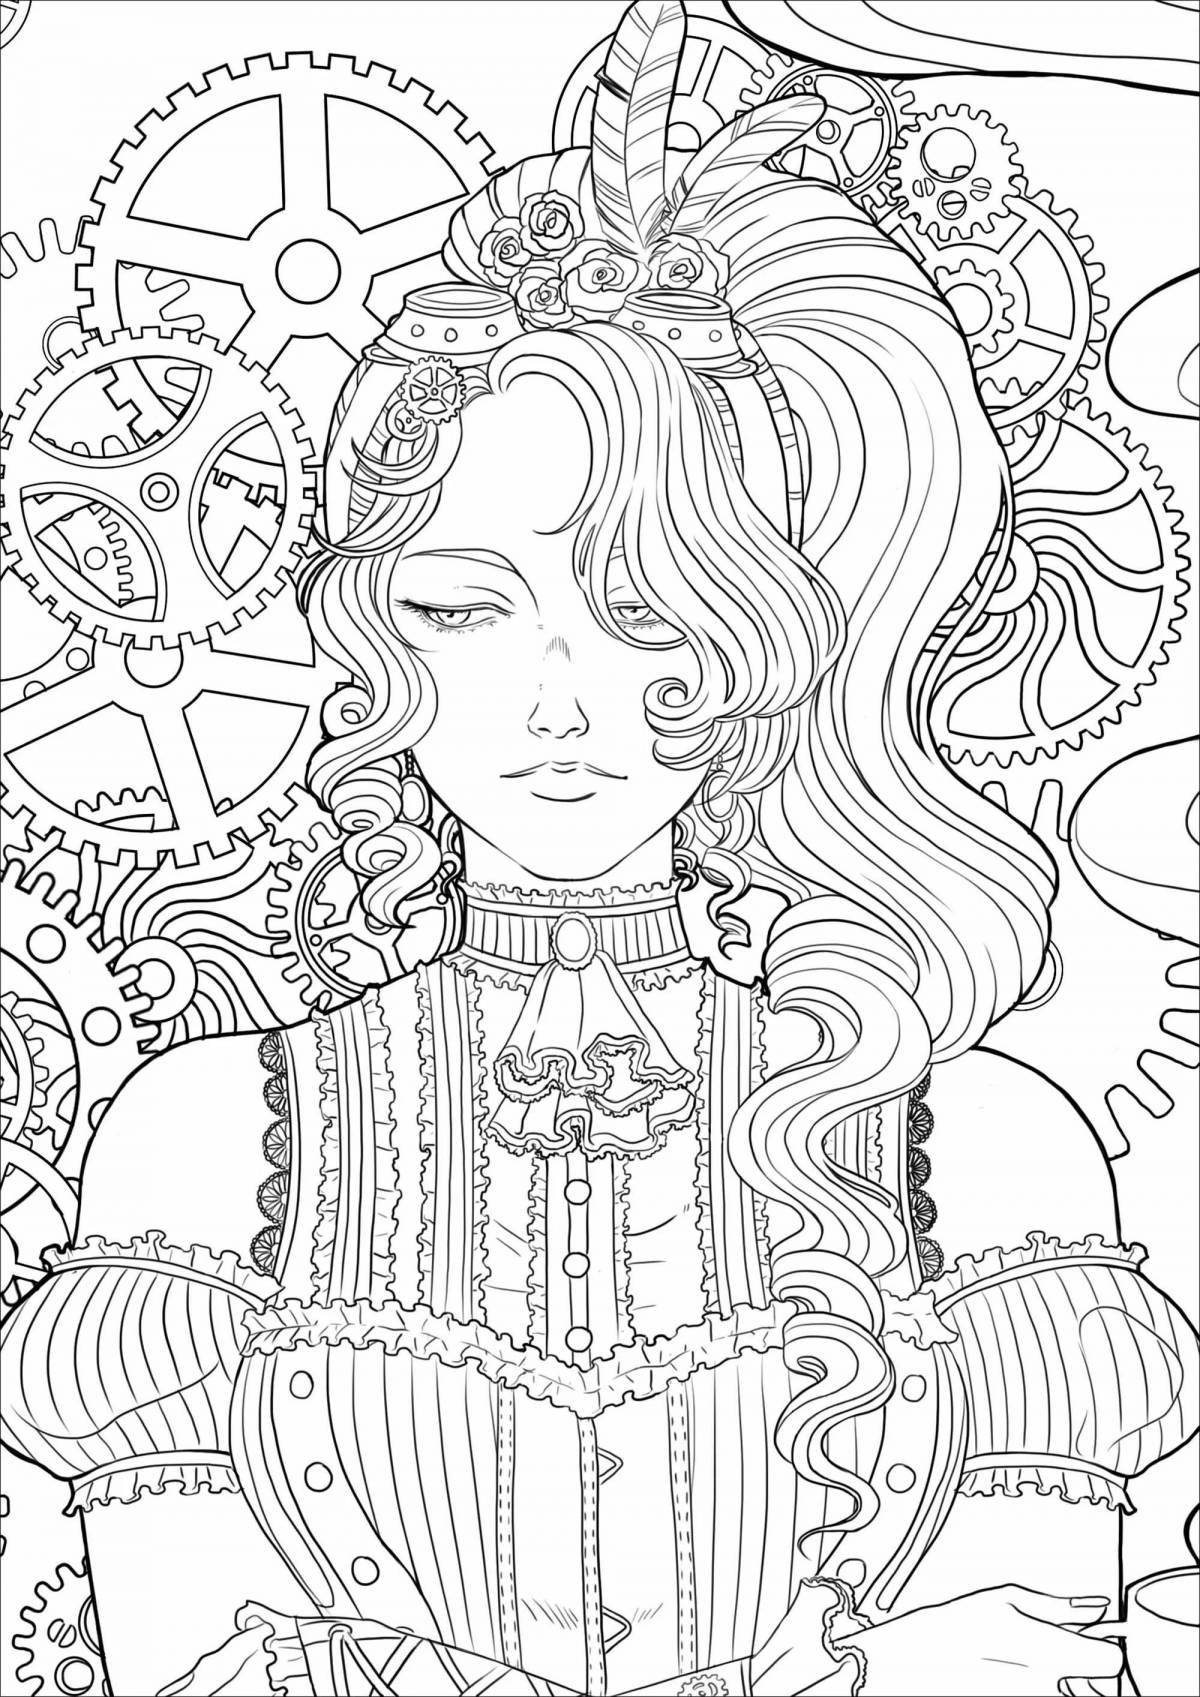 Exquisite antistress coloring book for girls 13 years old